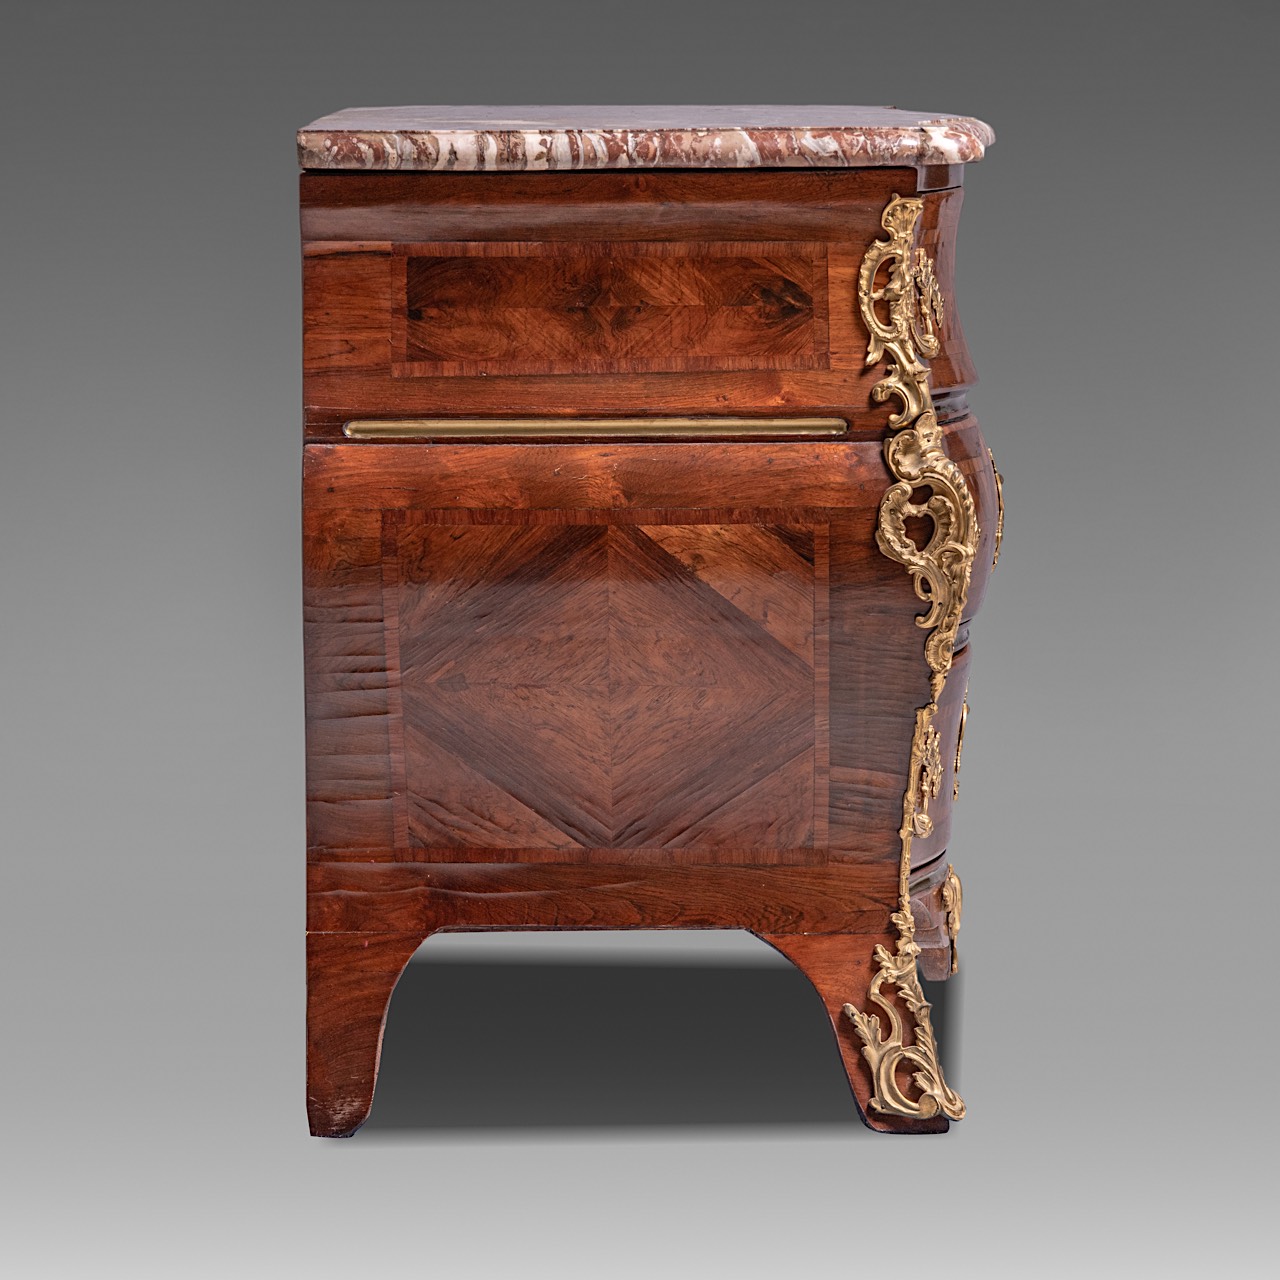 A Regence 'commode galbee', mid 18thC, H 86 - W 131 - D 63,5 cm - Image 5 of 6